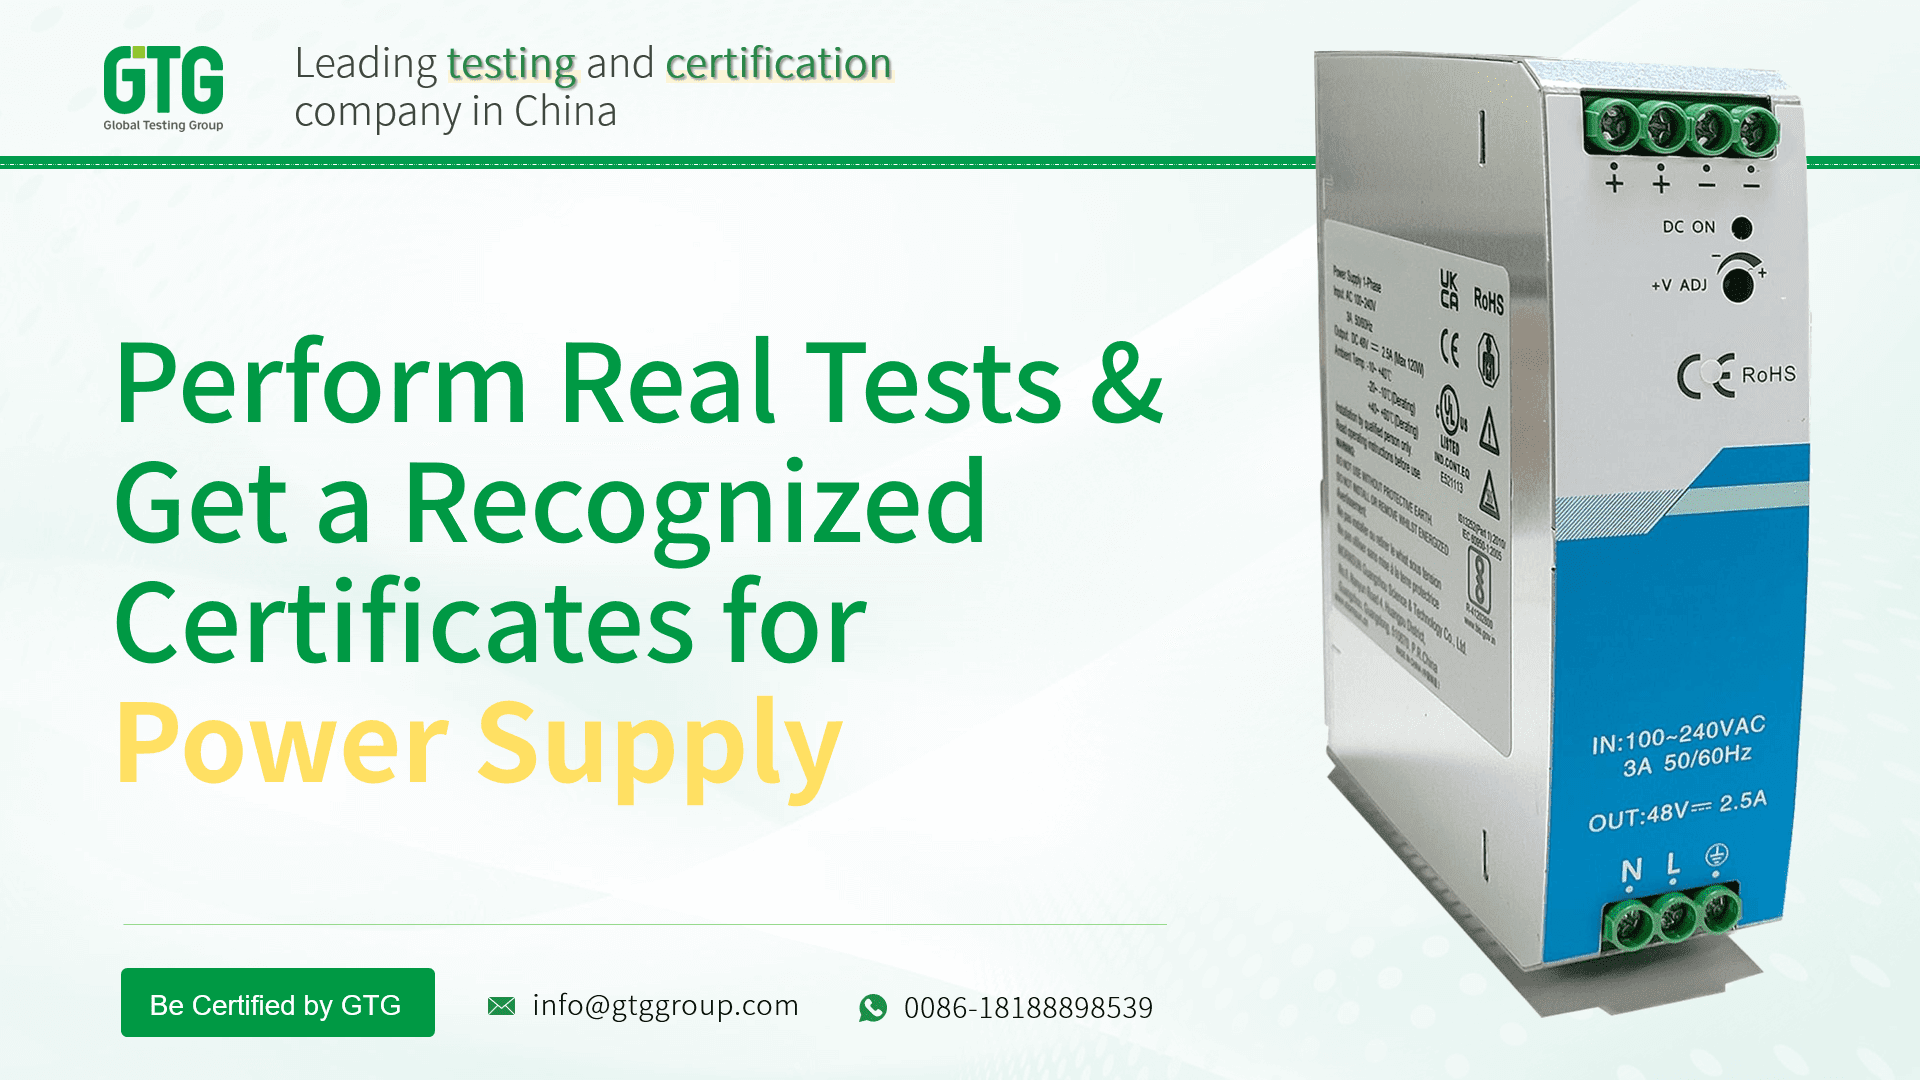 Get Test Report and Certifications for Industrial Power Supply from GTG Group